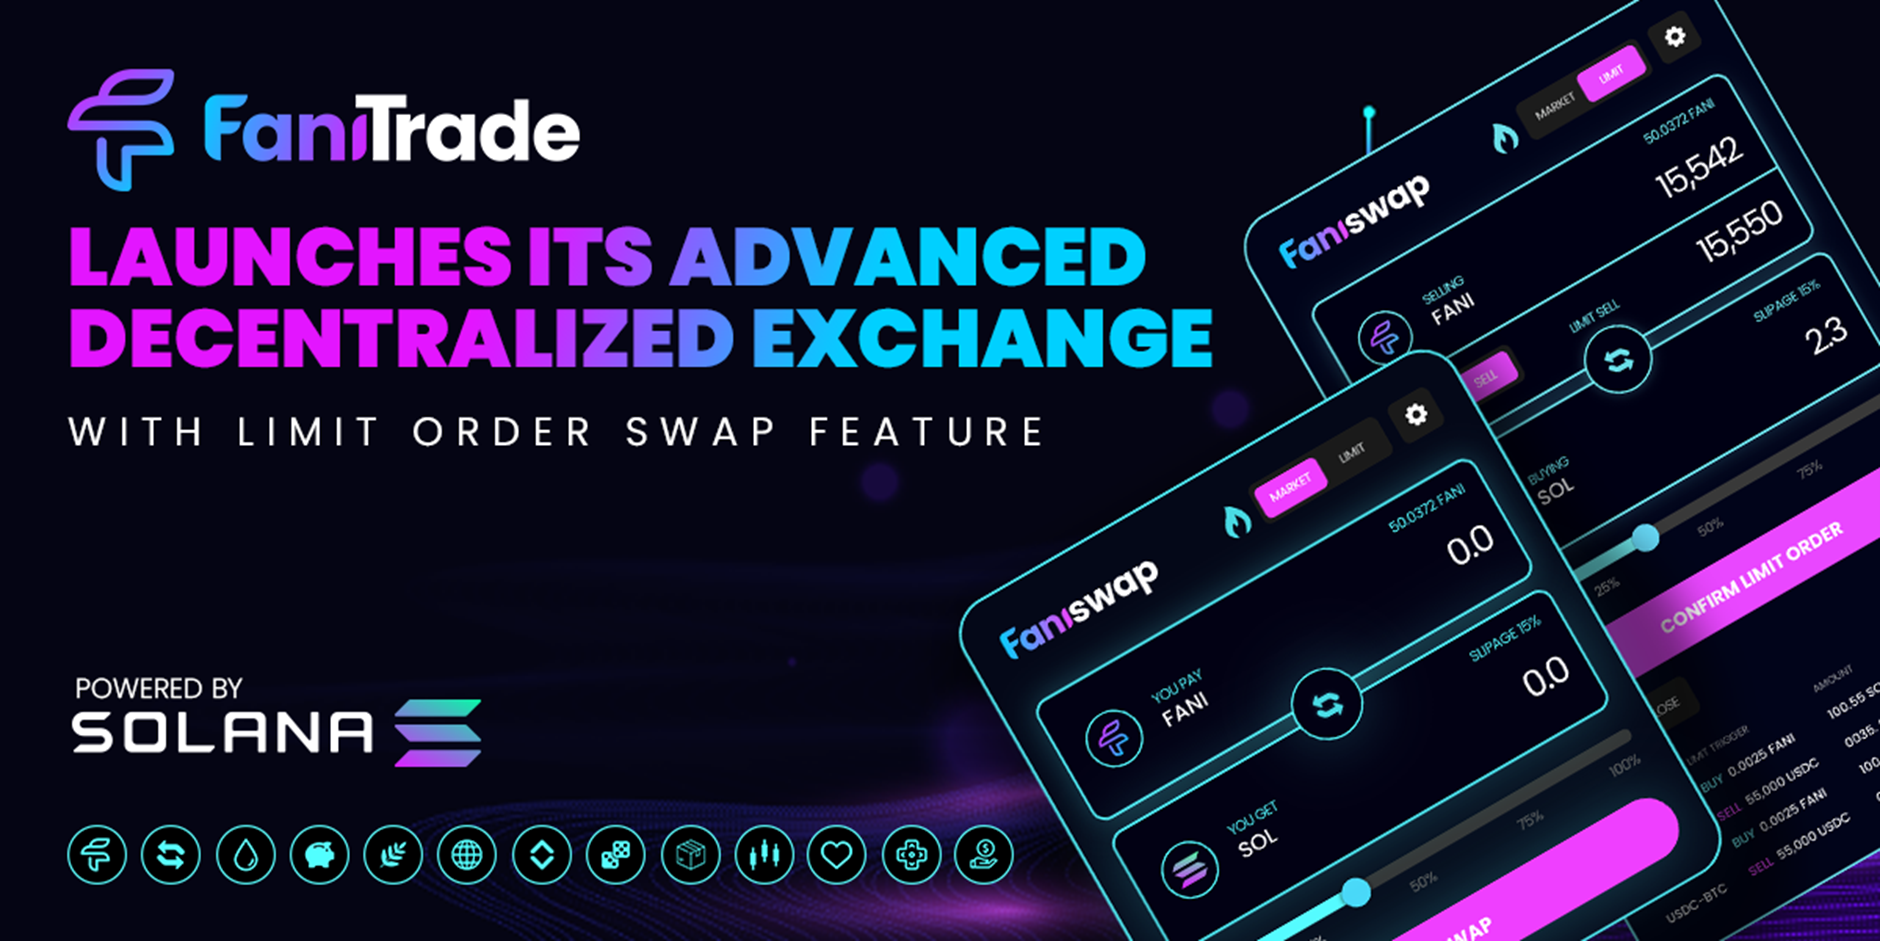 FaniTrade Announces the Official Launch of Its Advanced Decentralized Exchange With the Limit Order Swap Feature